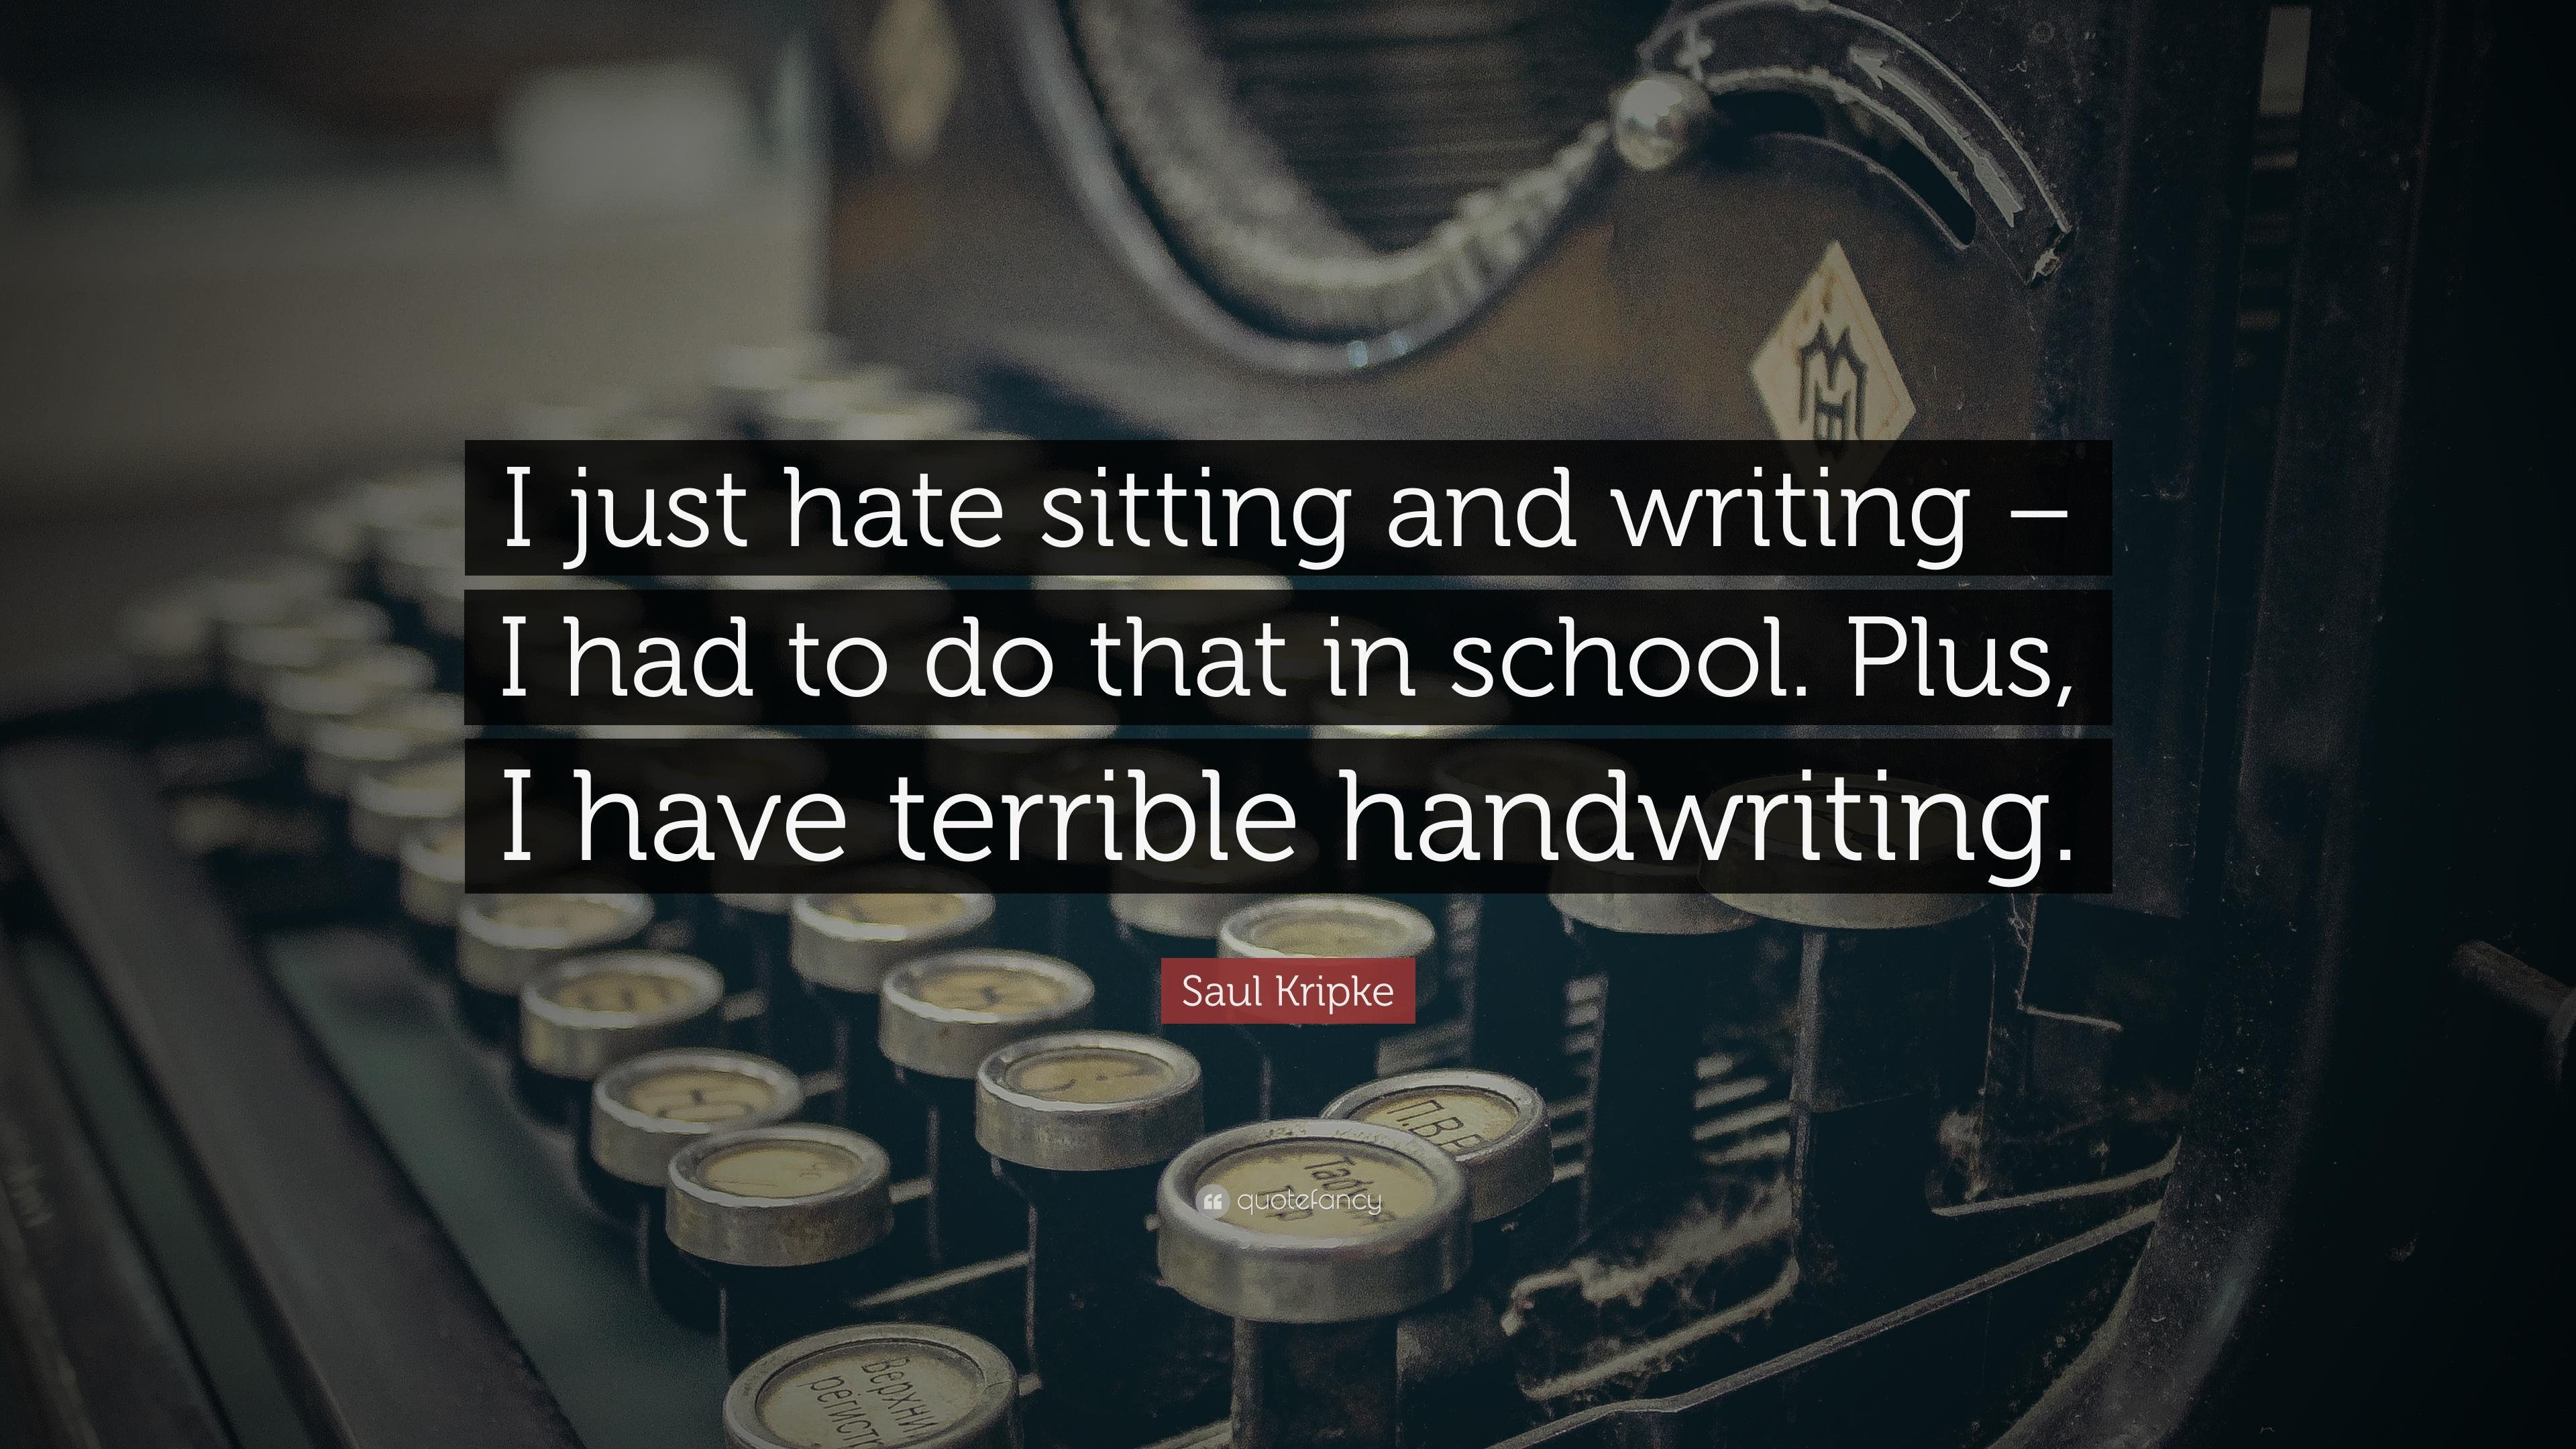 Saul Kripke Quote: “I just hate sitting and writing